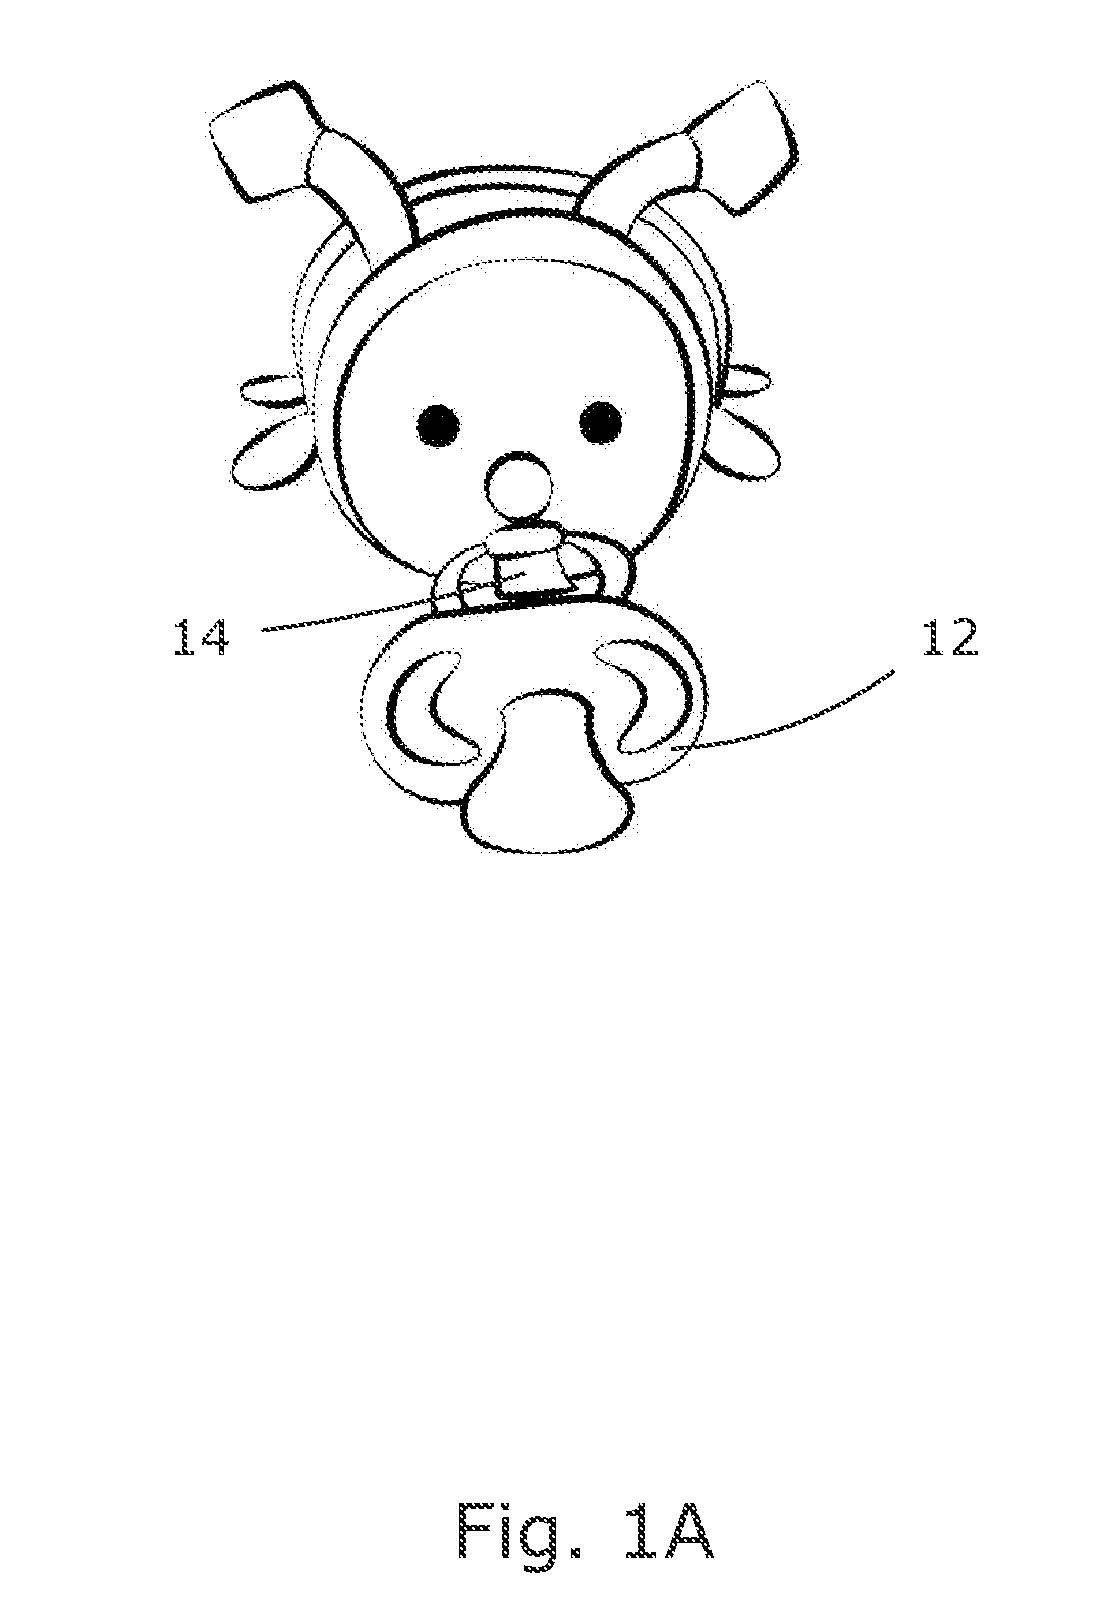 Plush animal shaped toy with pacifier